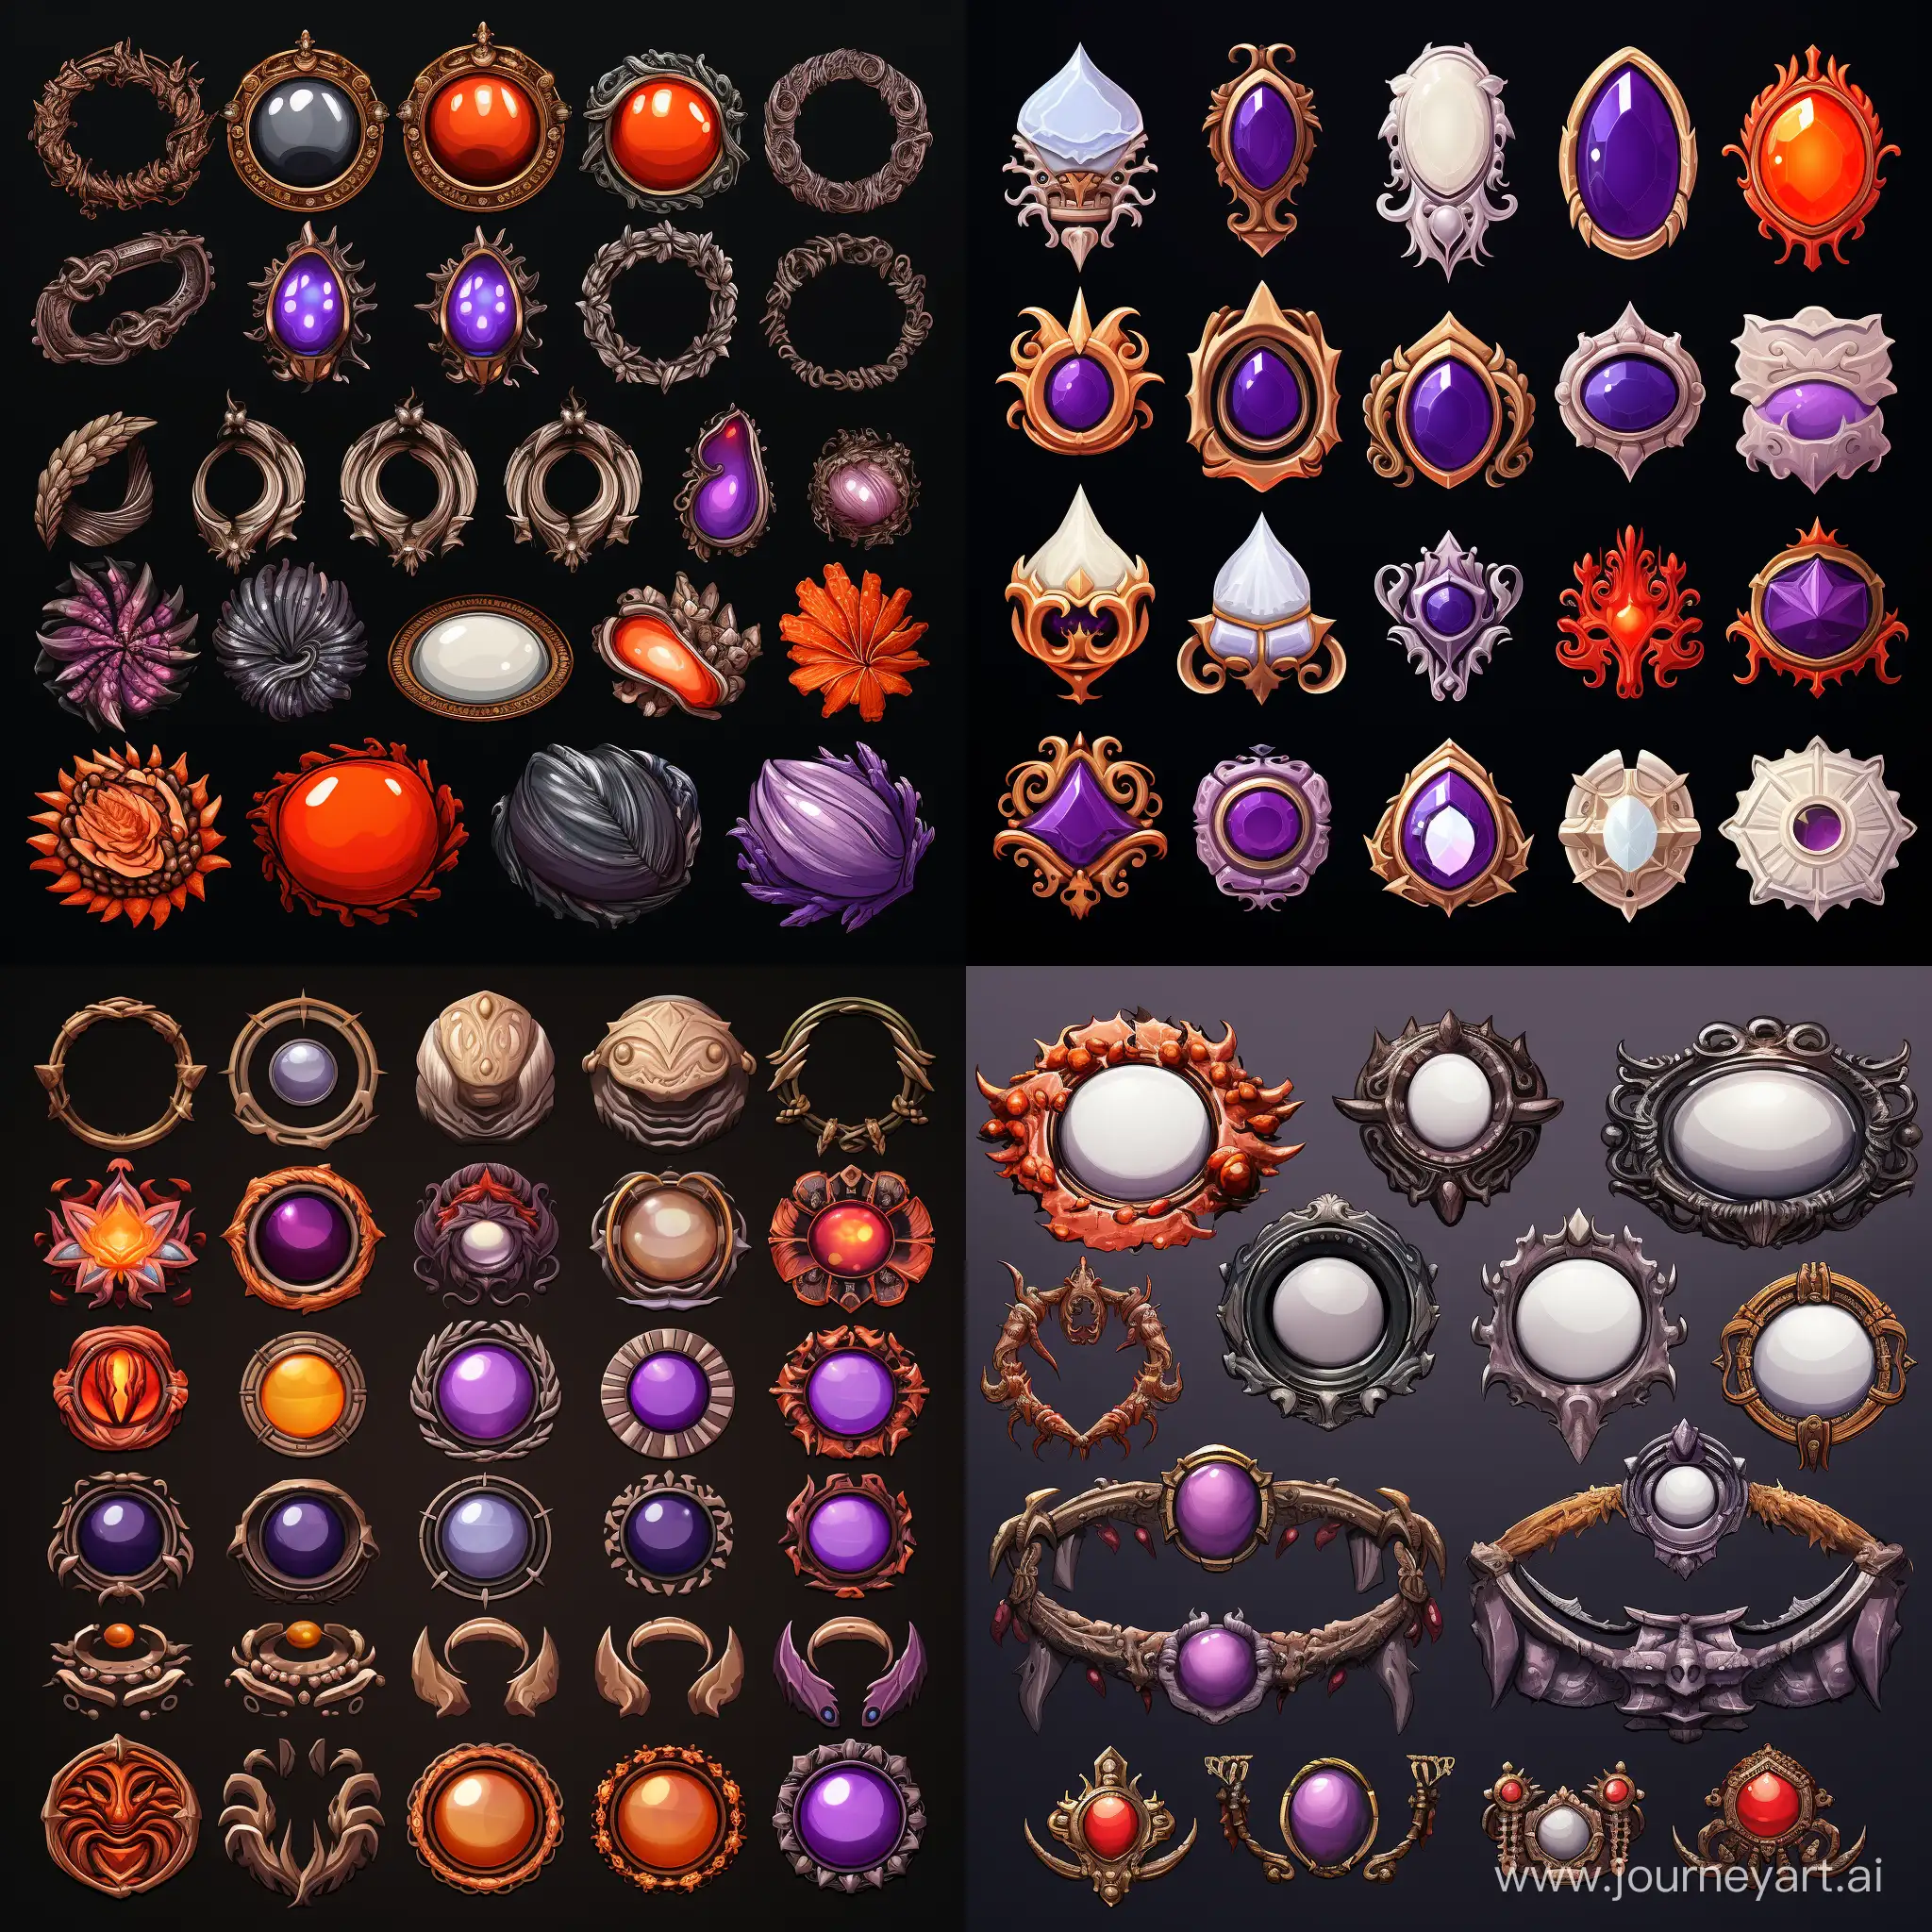 Fantasy-Item-Spritesheet-with-Magical-Elements-in-Black-Red-White-Purple-and-Orange-Colors